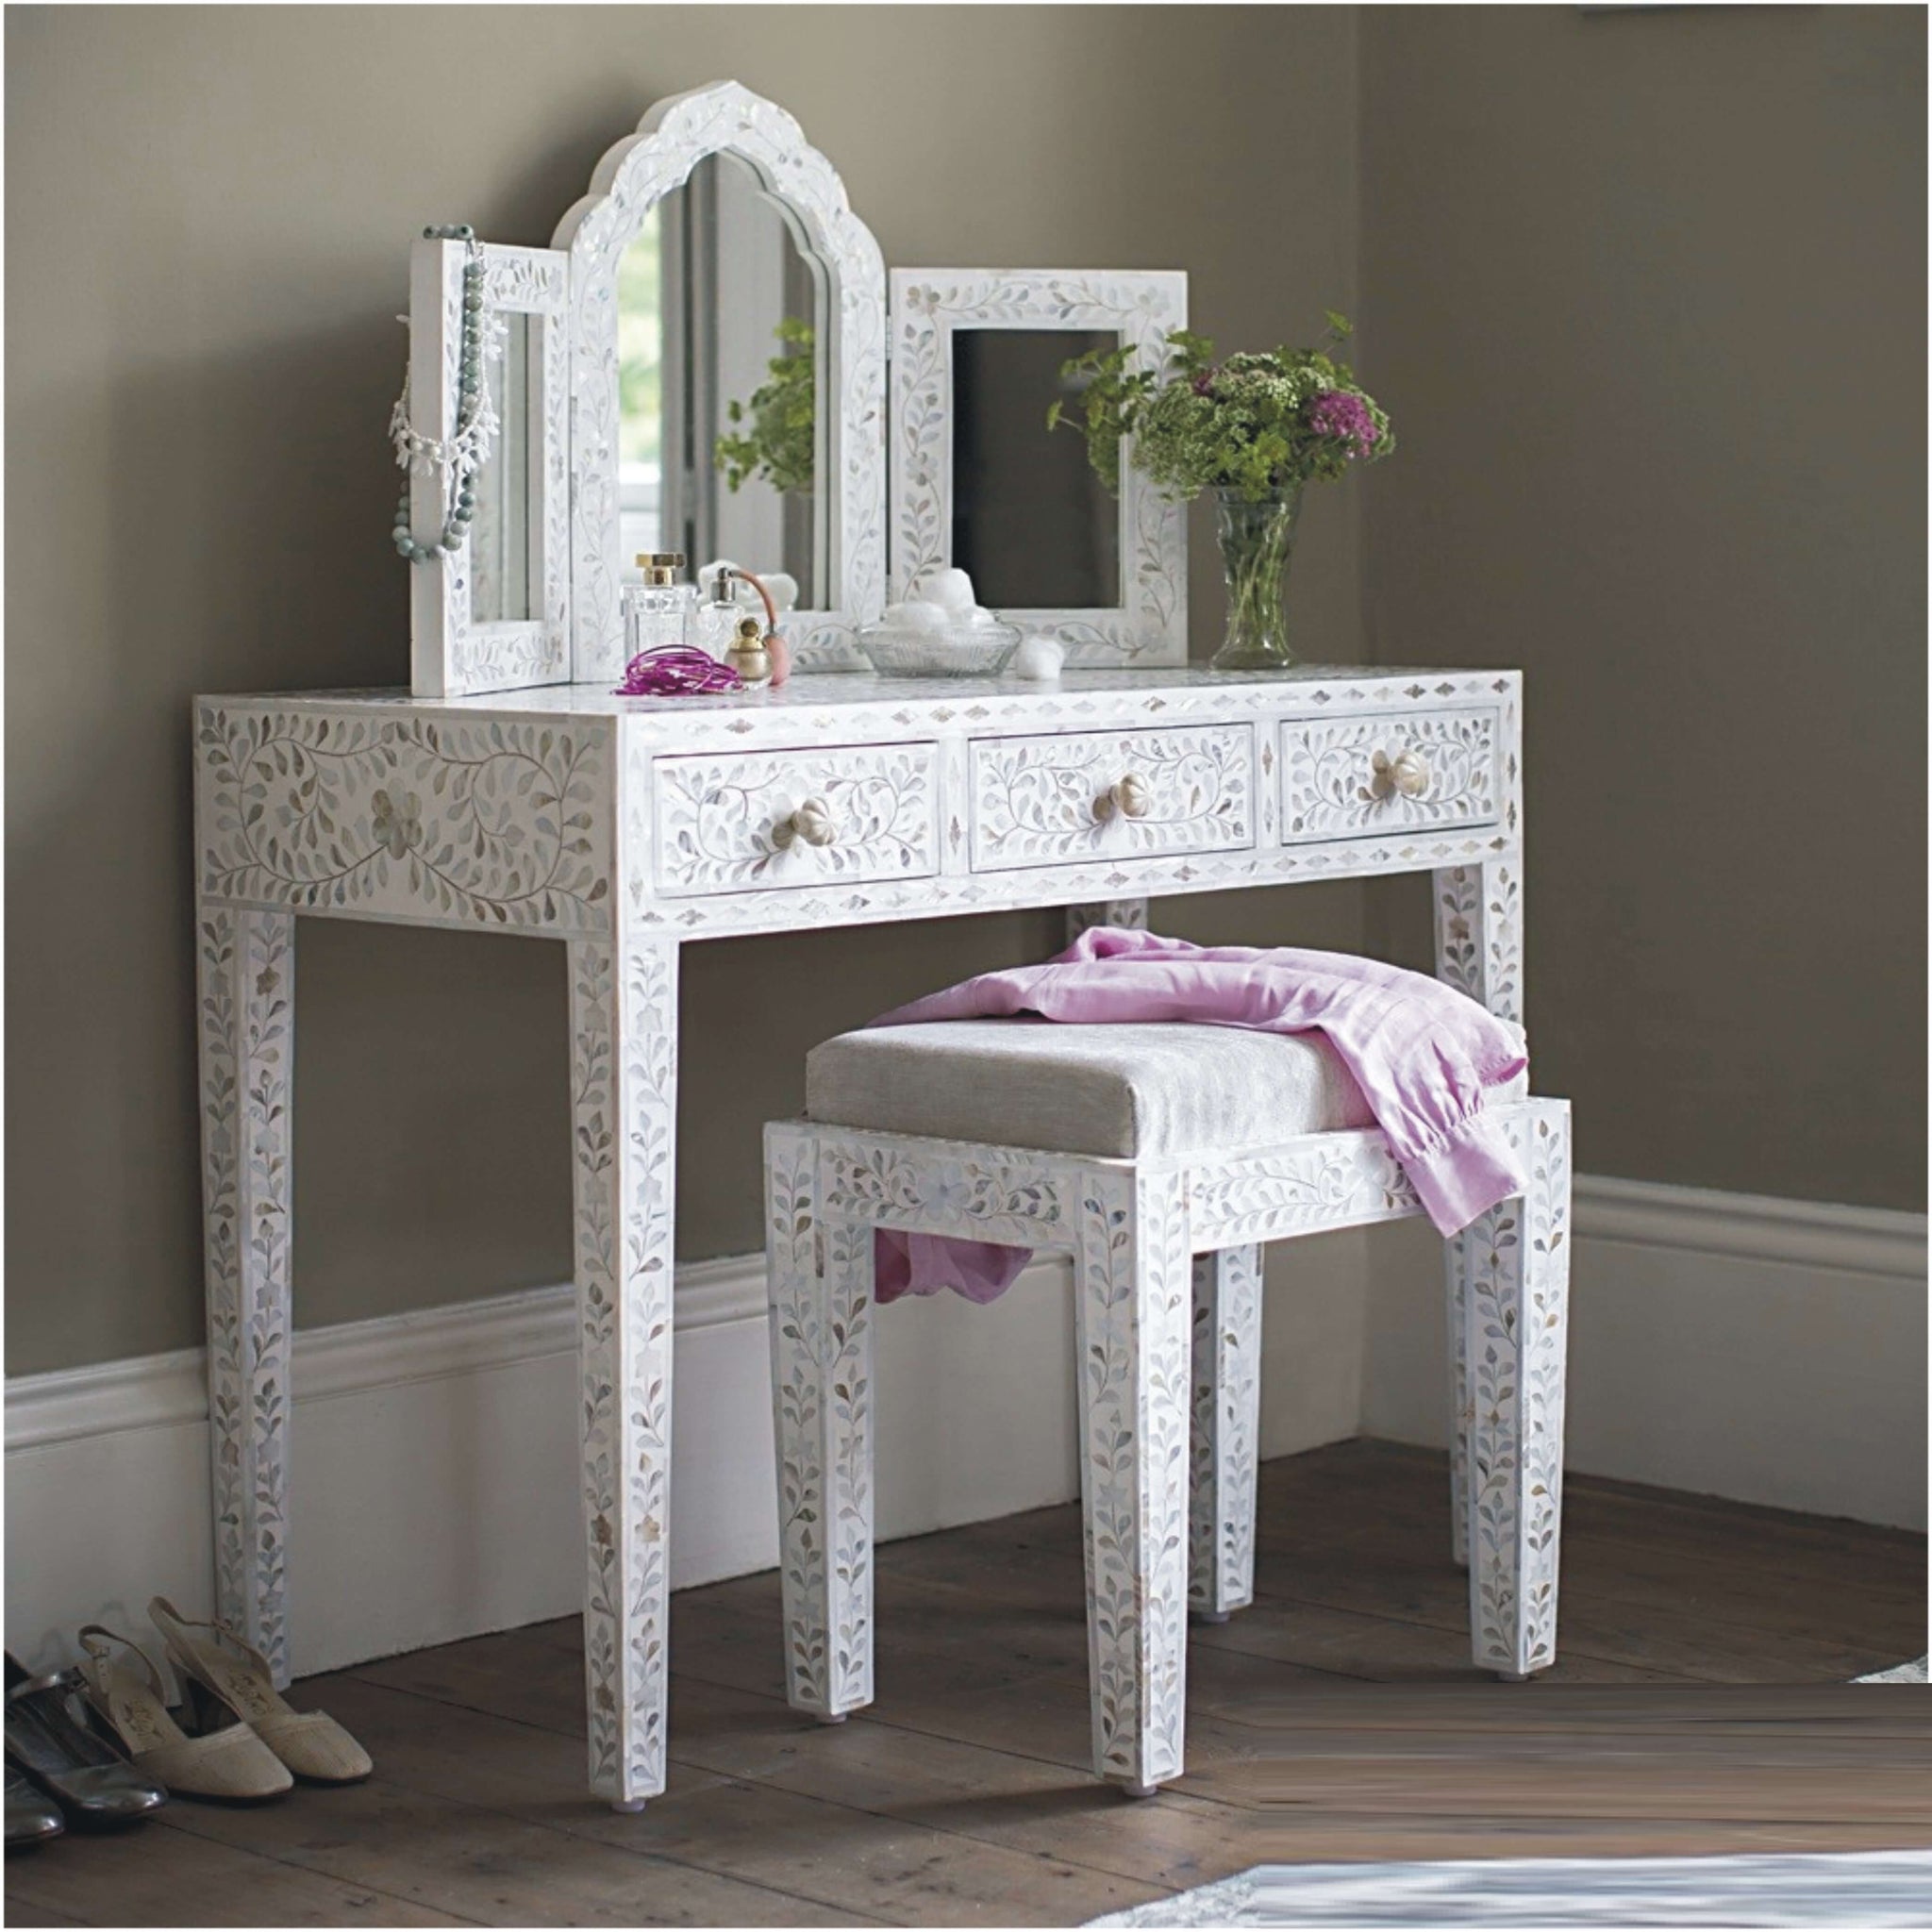 Mother of Pearl Inlay Vanity Combo White